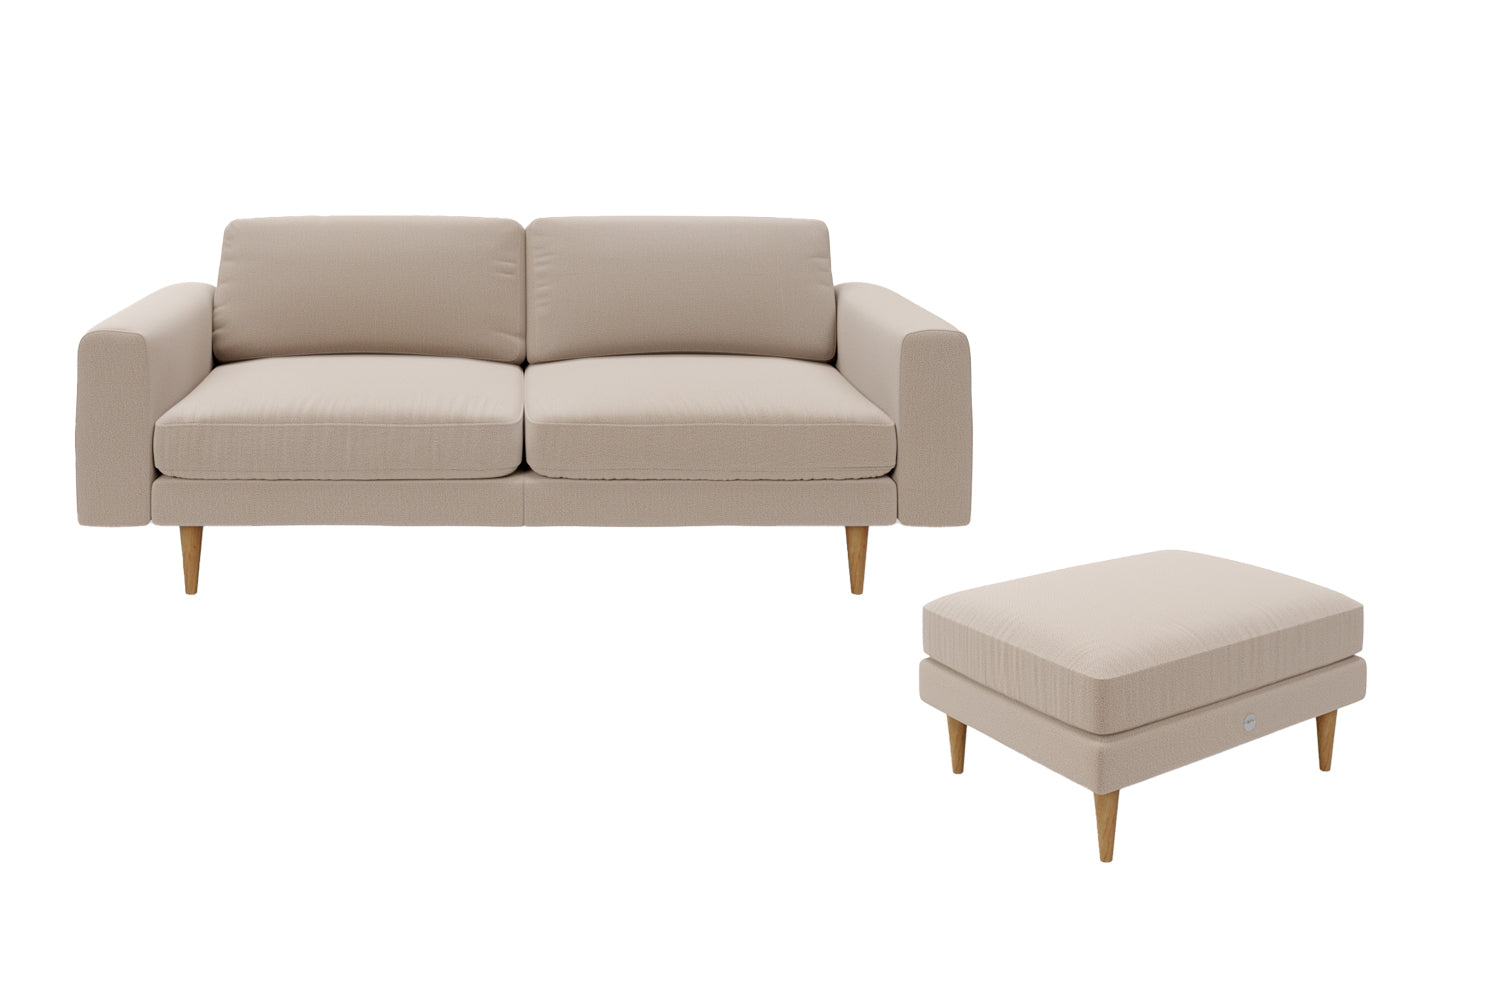 The Big Chill - 3 Seater Sofa and Footstool Set - Oatmeal